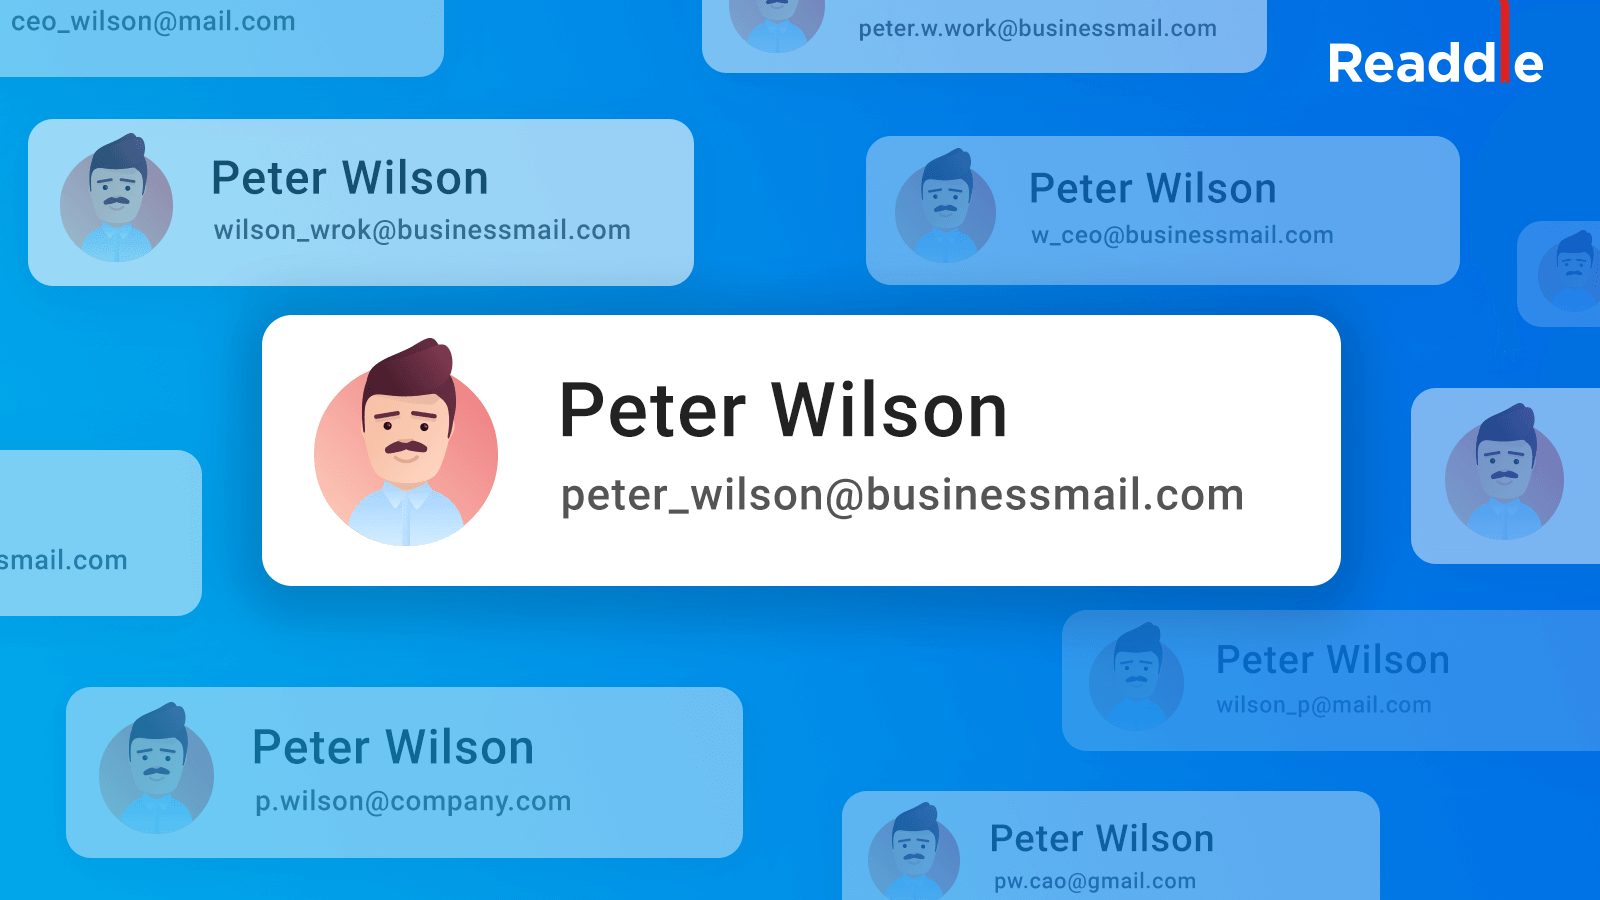 New contact email example